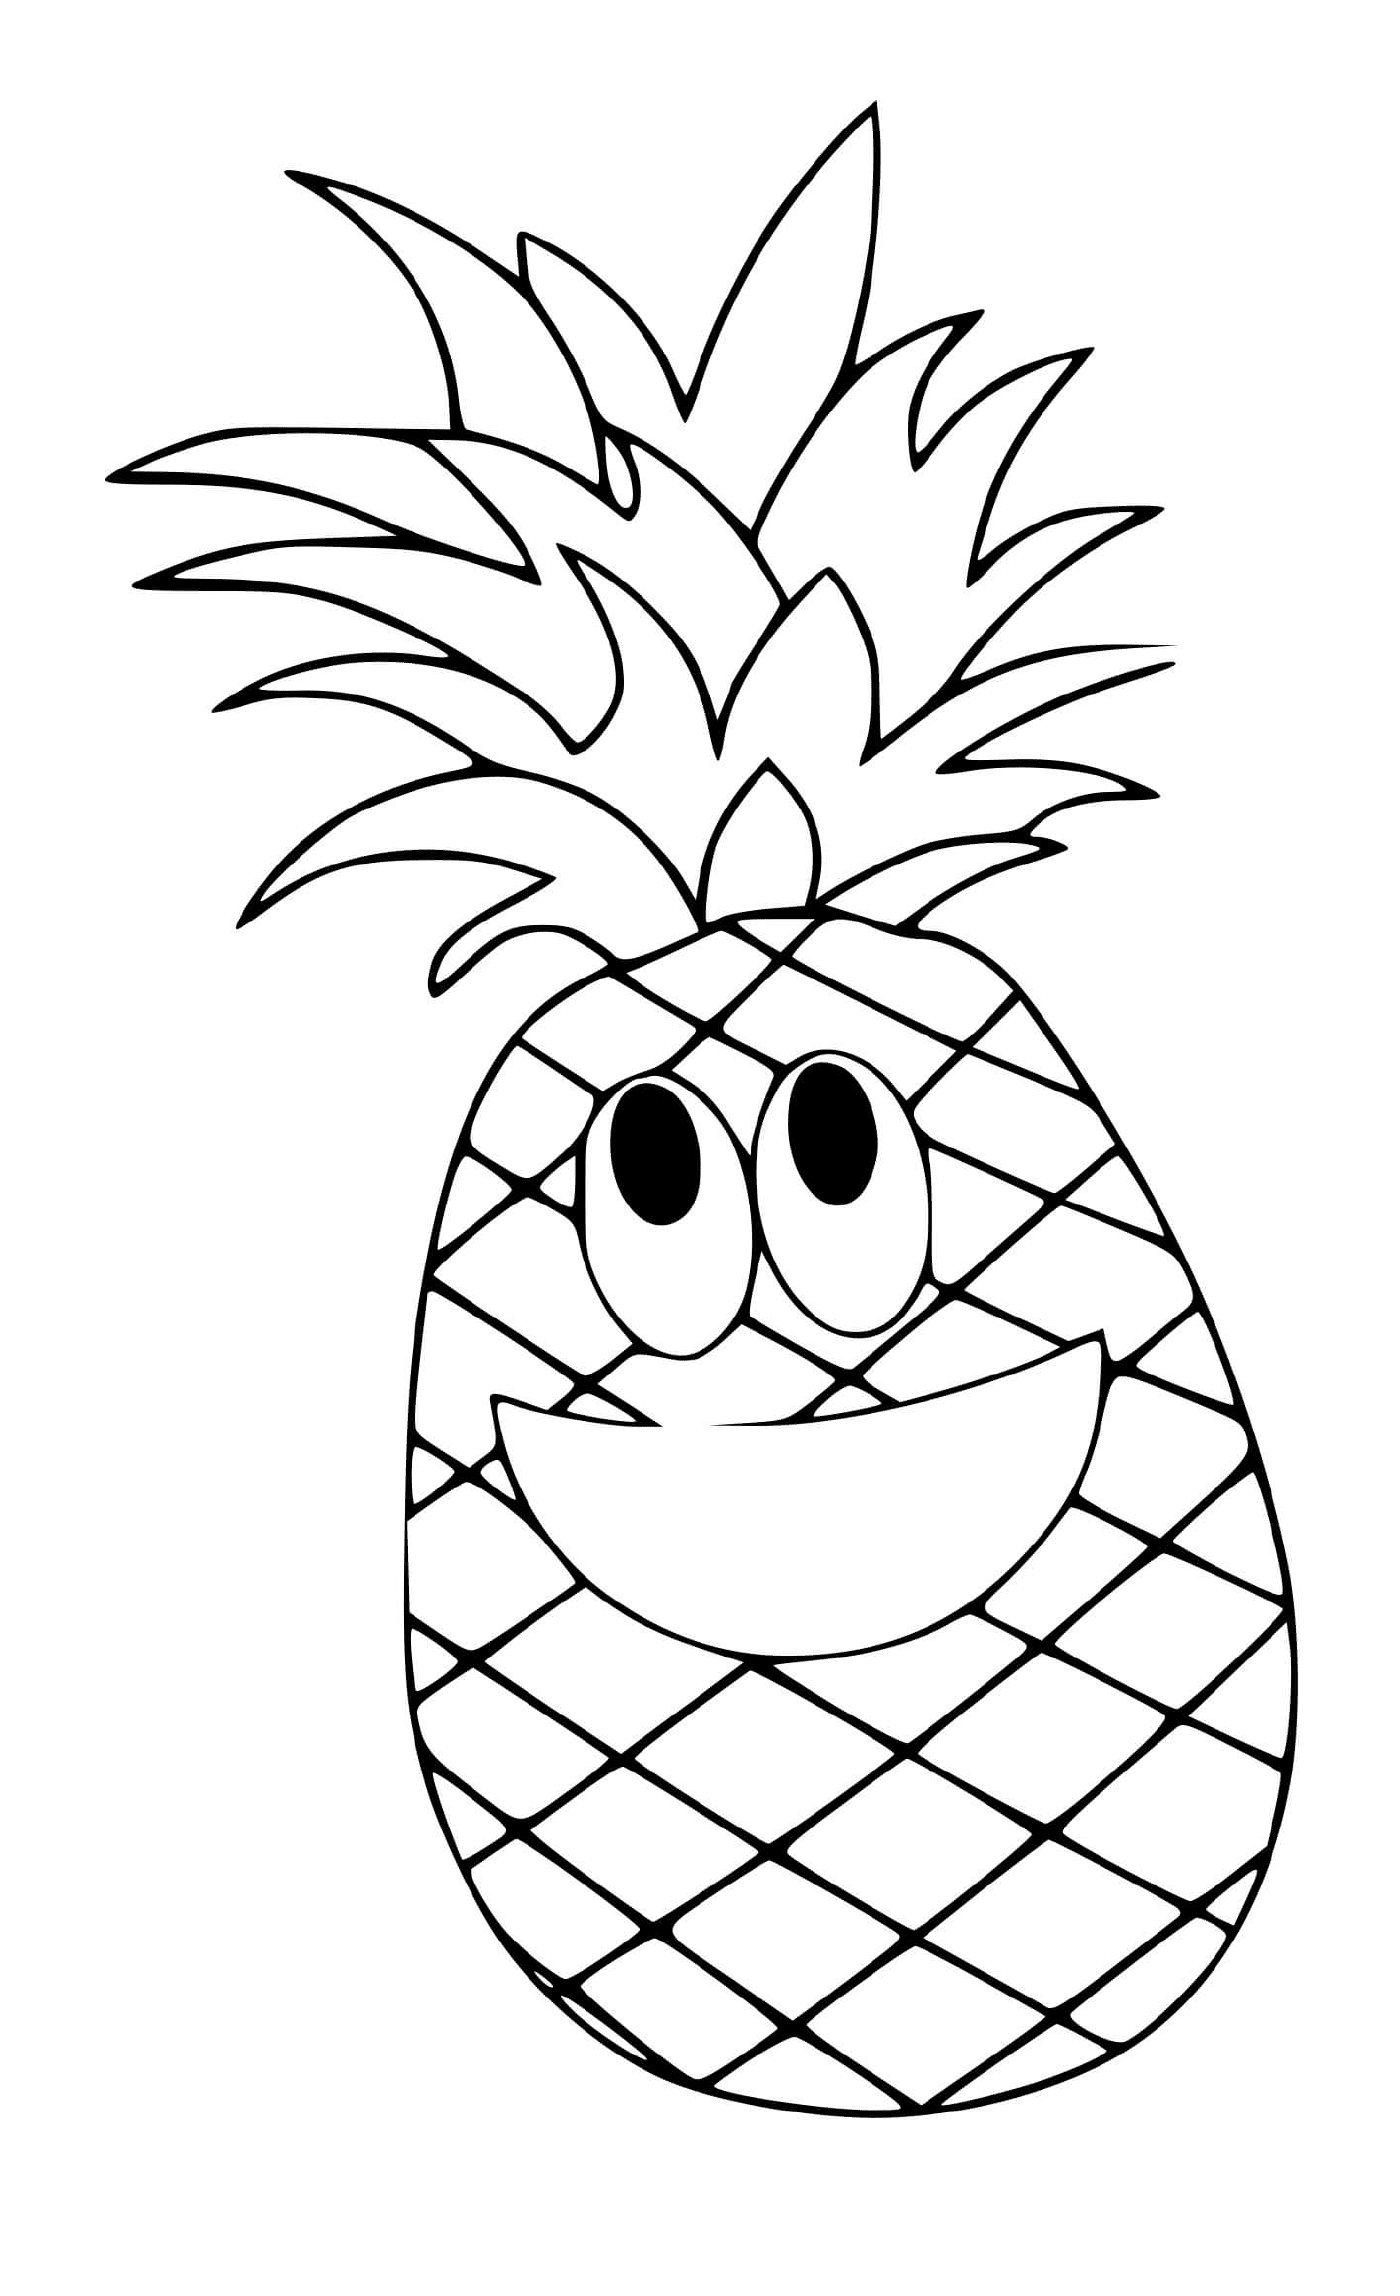  A happy and lively pineapple 